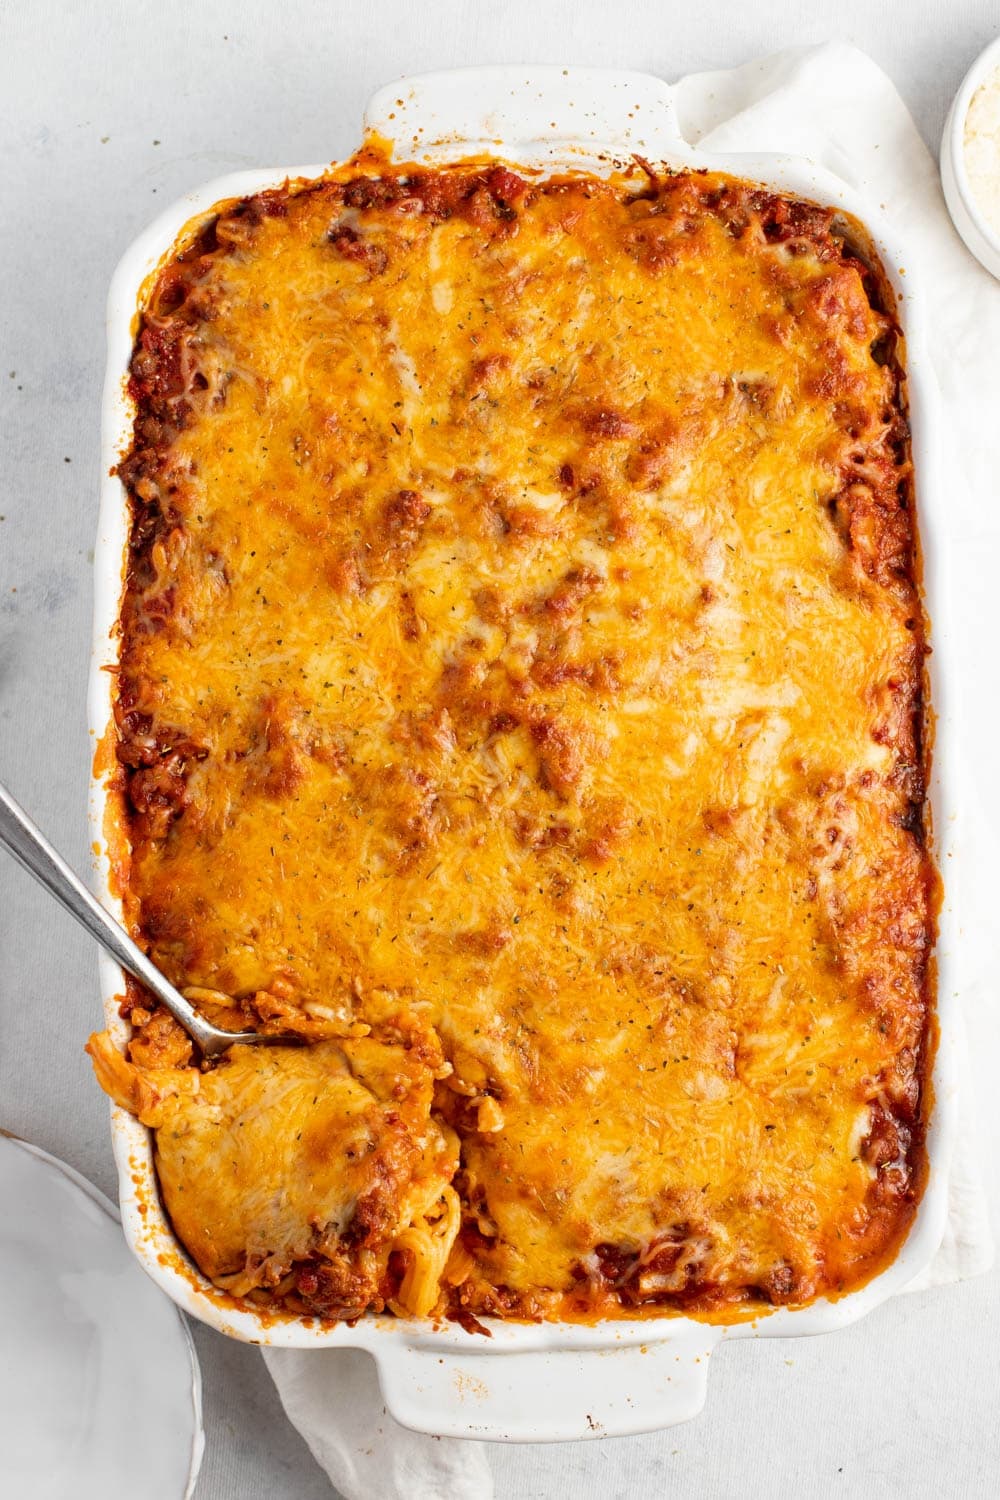 Top View of Baked Spaghetti in a white rectangular baking dish, with spoon dipped on it for serving. 